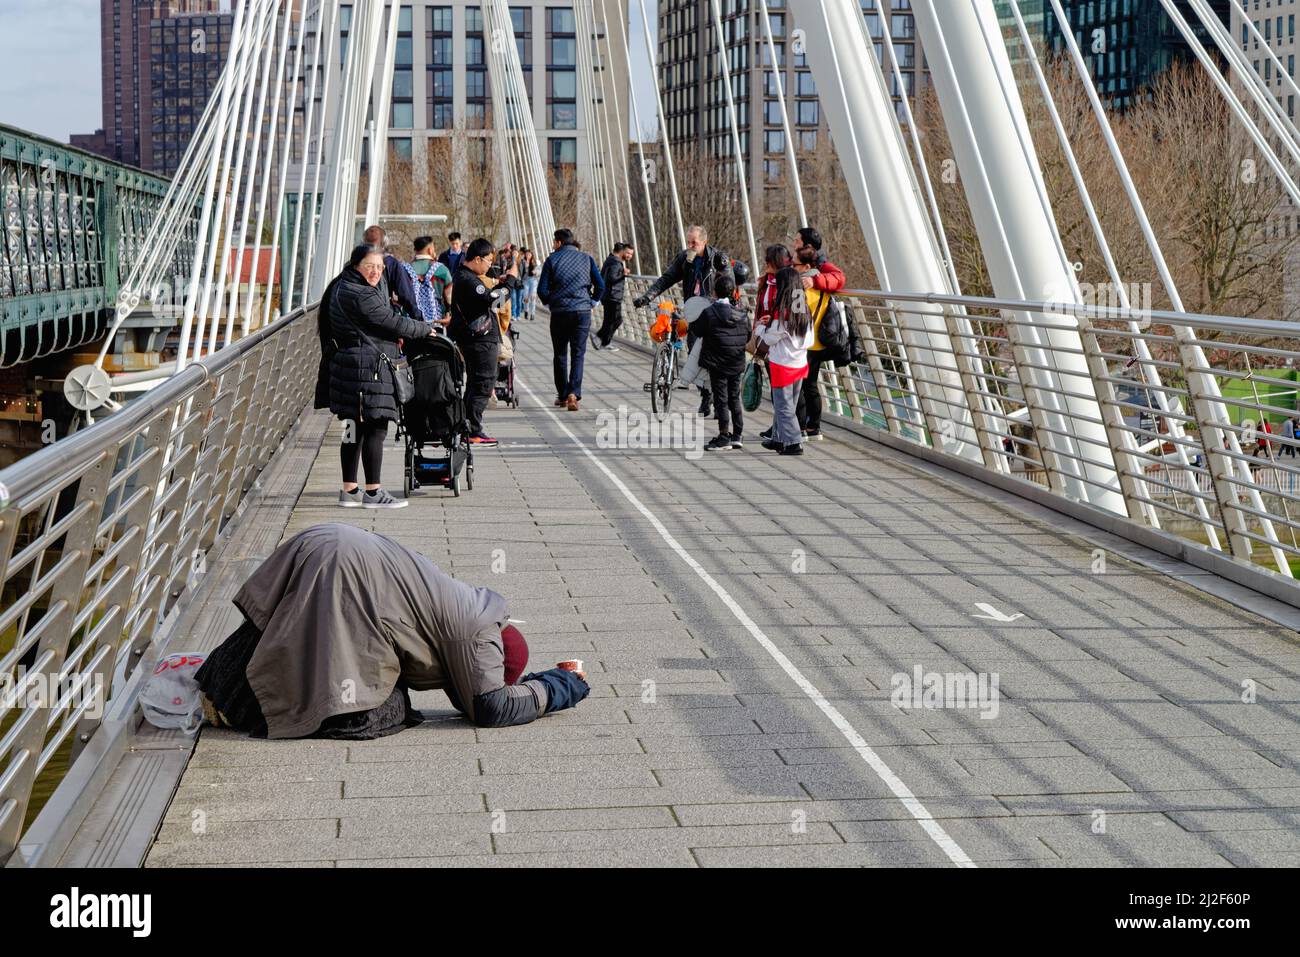 A lone beggar lying prostrate on the ground begging on the Golden Jubilee pedestrian bridge with tourists passing by, Charing Cross London England UK Stock Photo